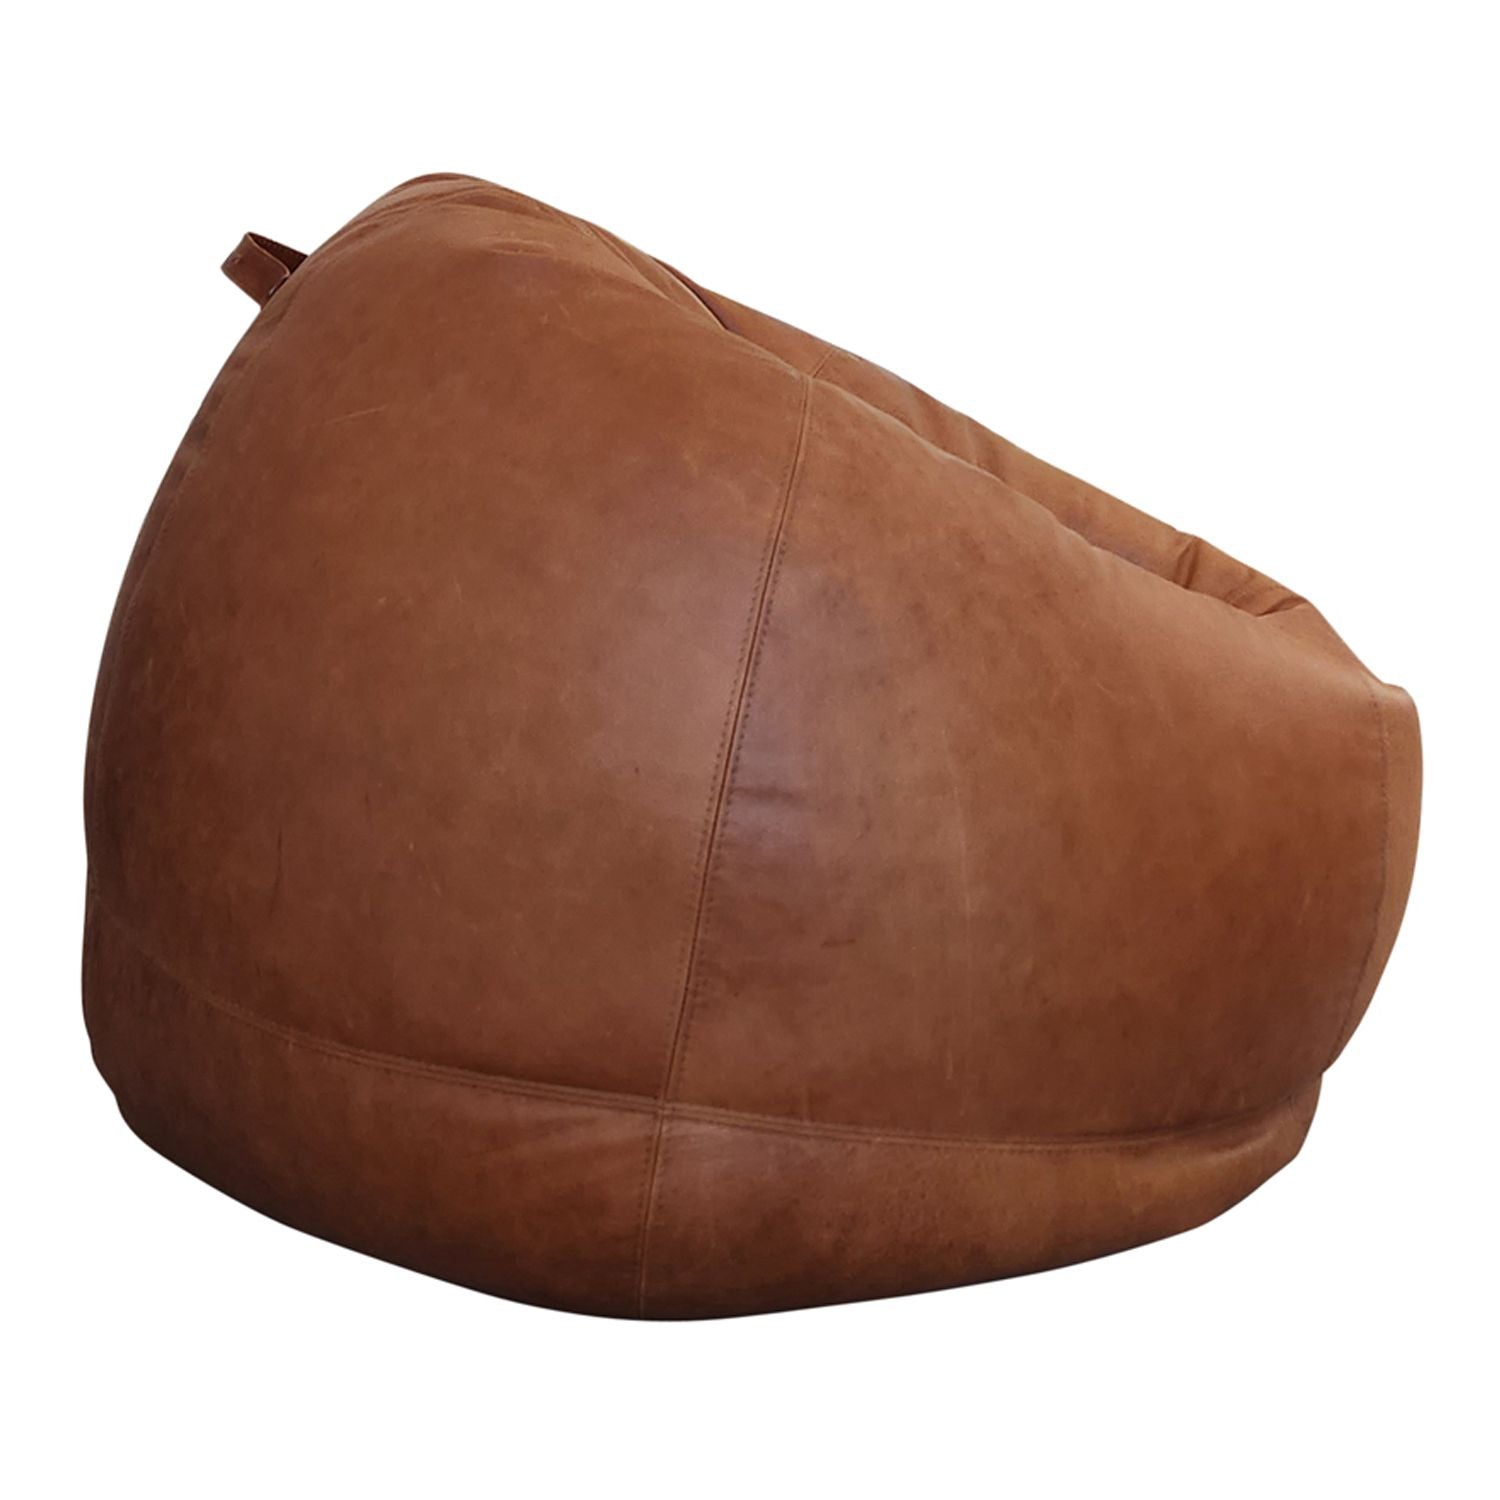 Genuine Leather Bean Bag Chair - The Big Pear - Tan – Luxeloungers